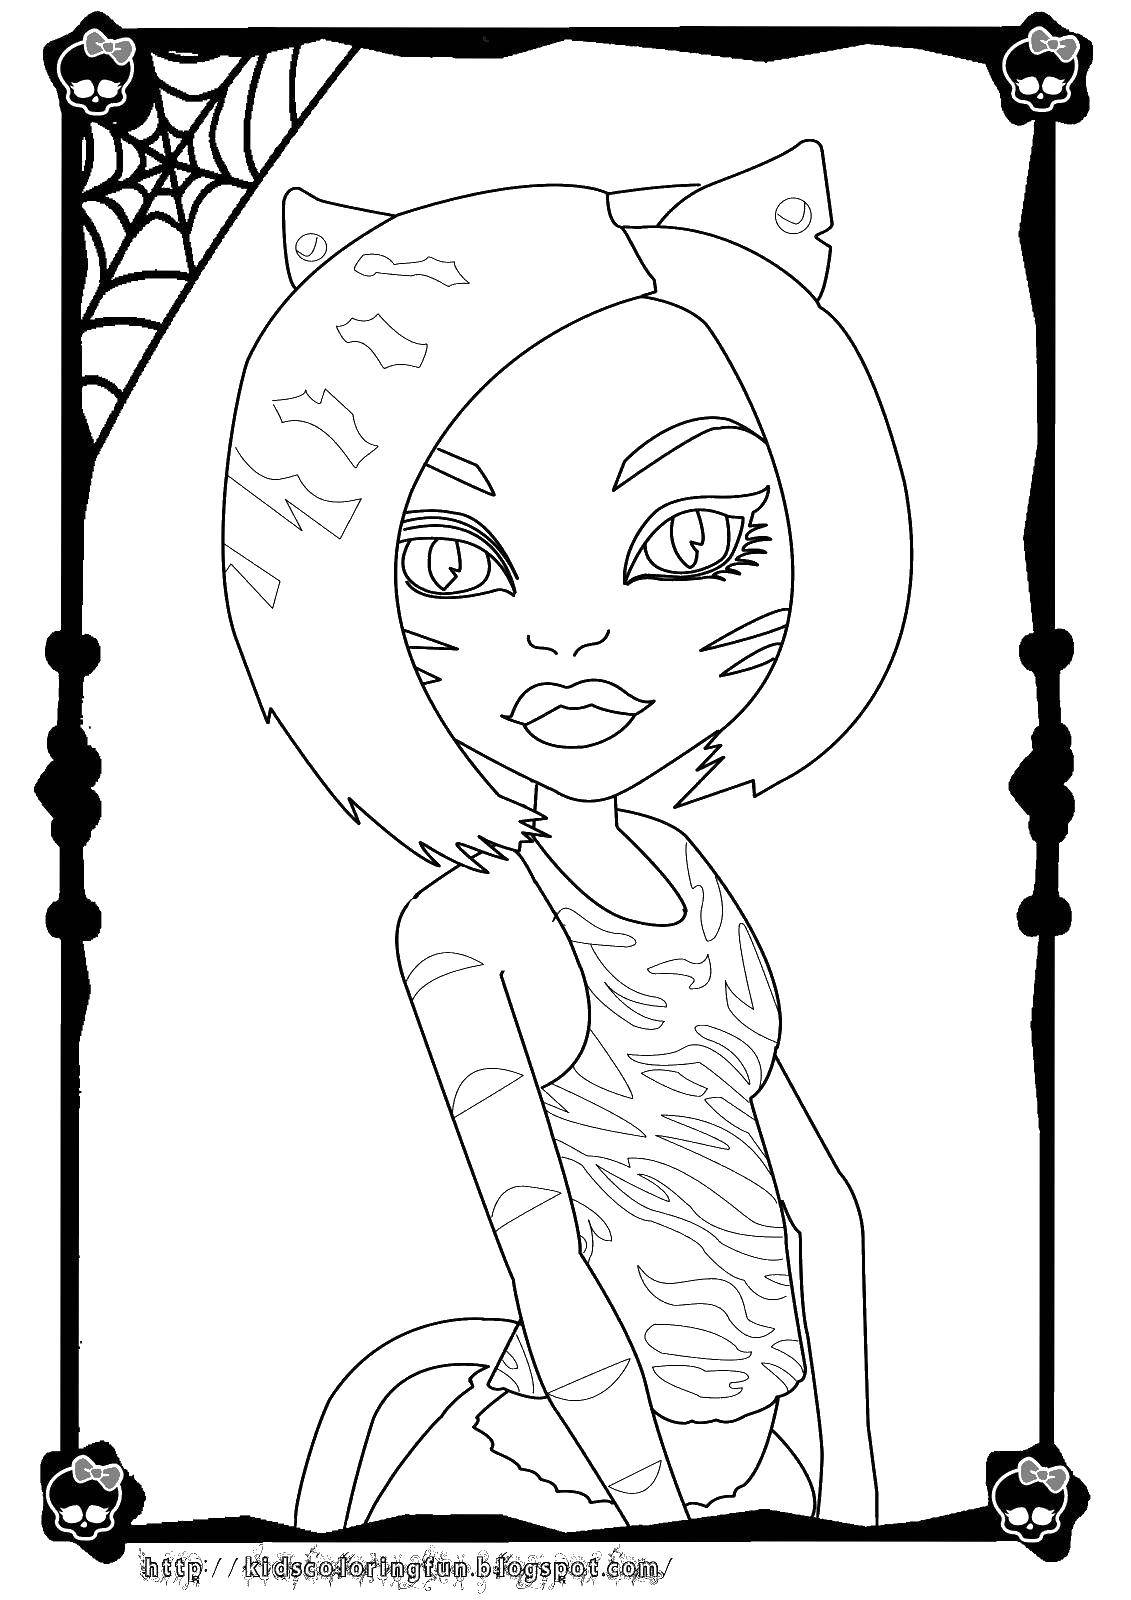 Coloring Doll kitty monster high. Category Monster high. Tags:  Monster high, doll, cartoon, cat.